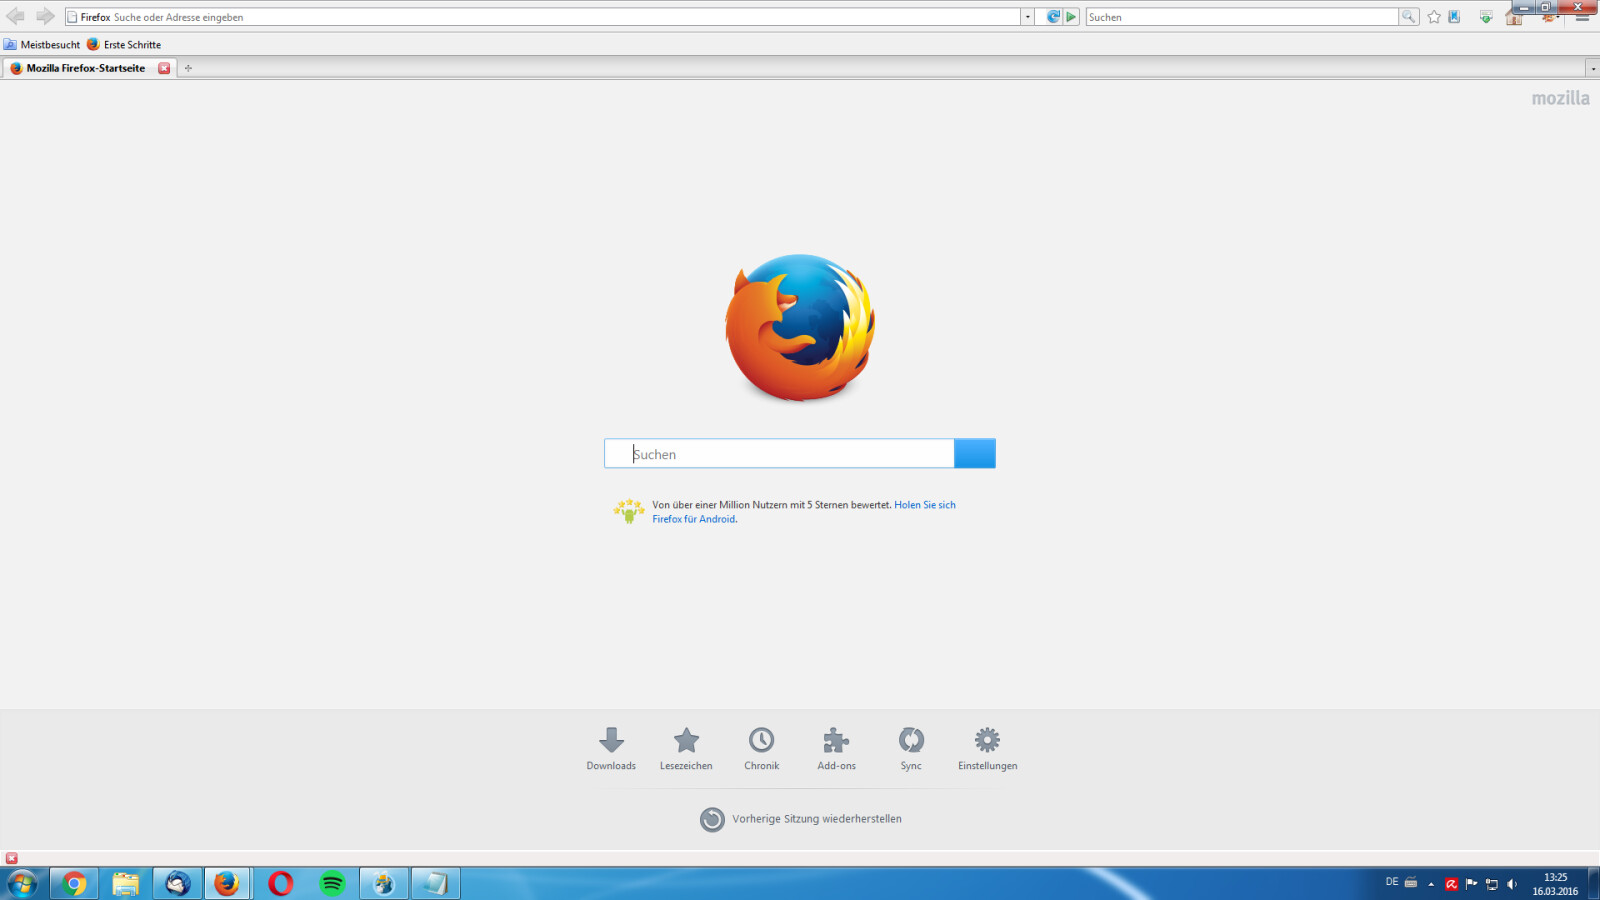 theme for mozilla firefox browser